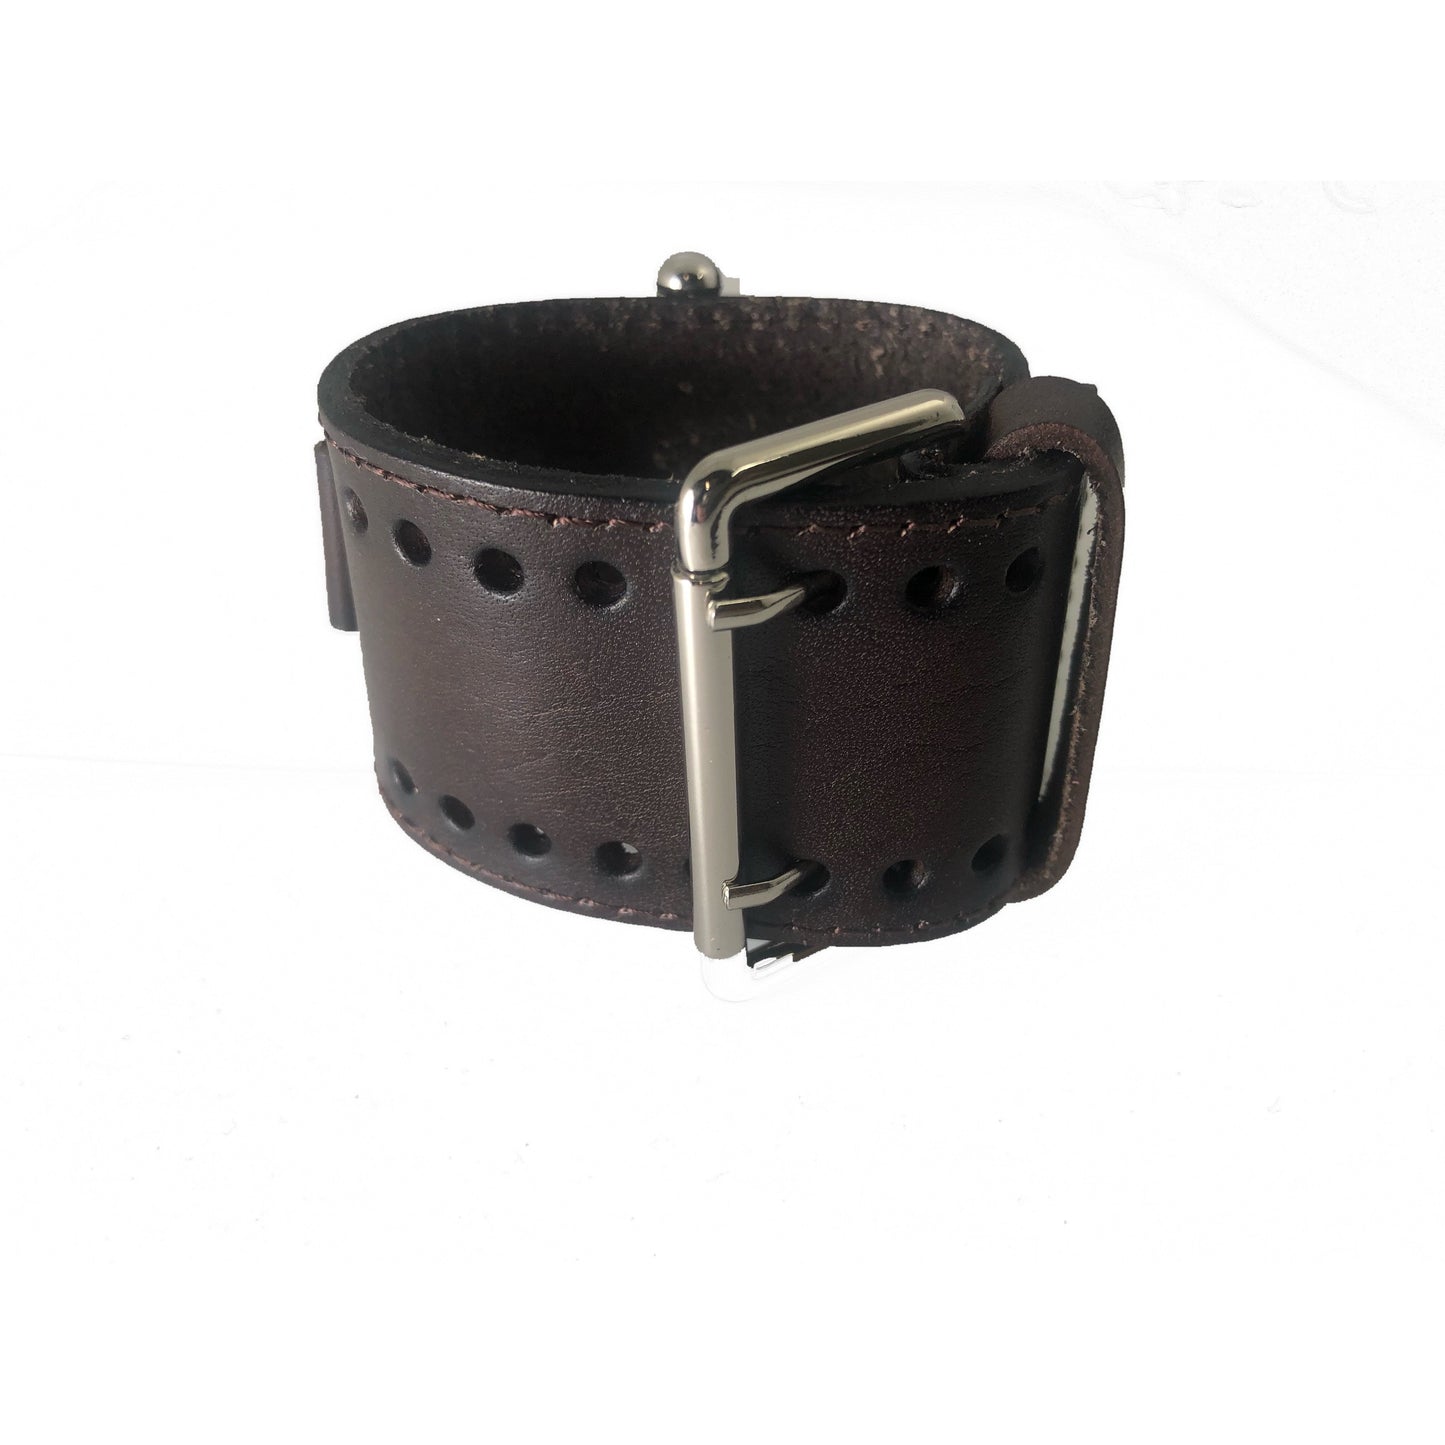 Teardrop Copper Watch with Perforated Dark Brown Leather Wide Cuff